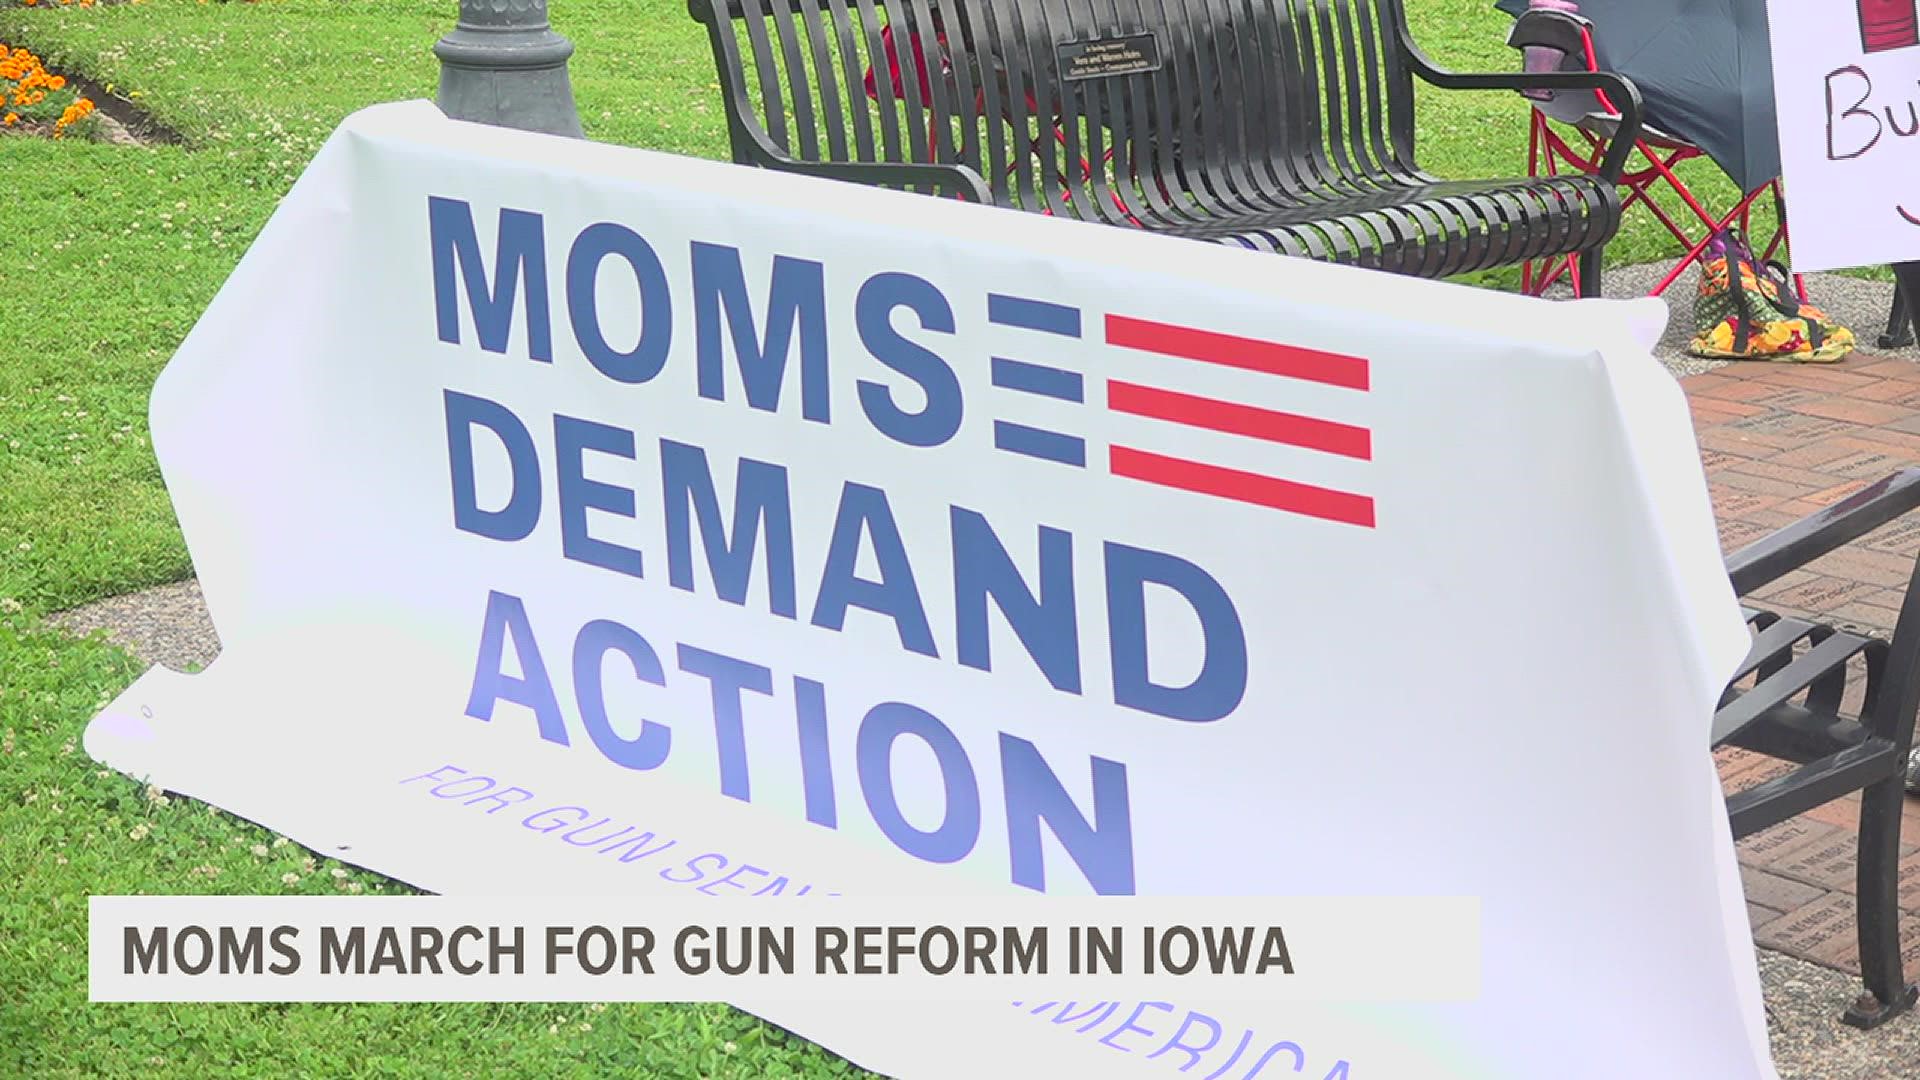 The moms marched at Vander Veer Park in favor of gun reform and asked Iowa legislators to reject a piece of a constitutional amendment head to Iowa ballots in Nov.